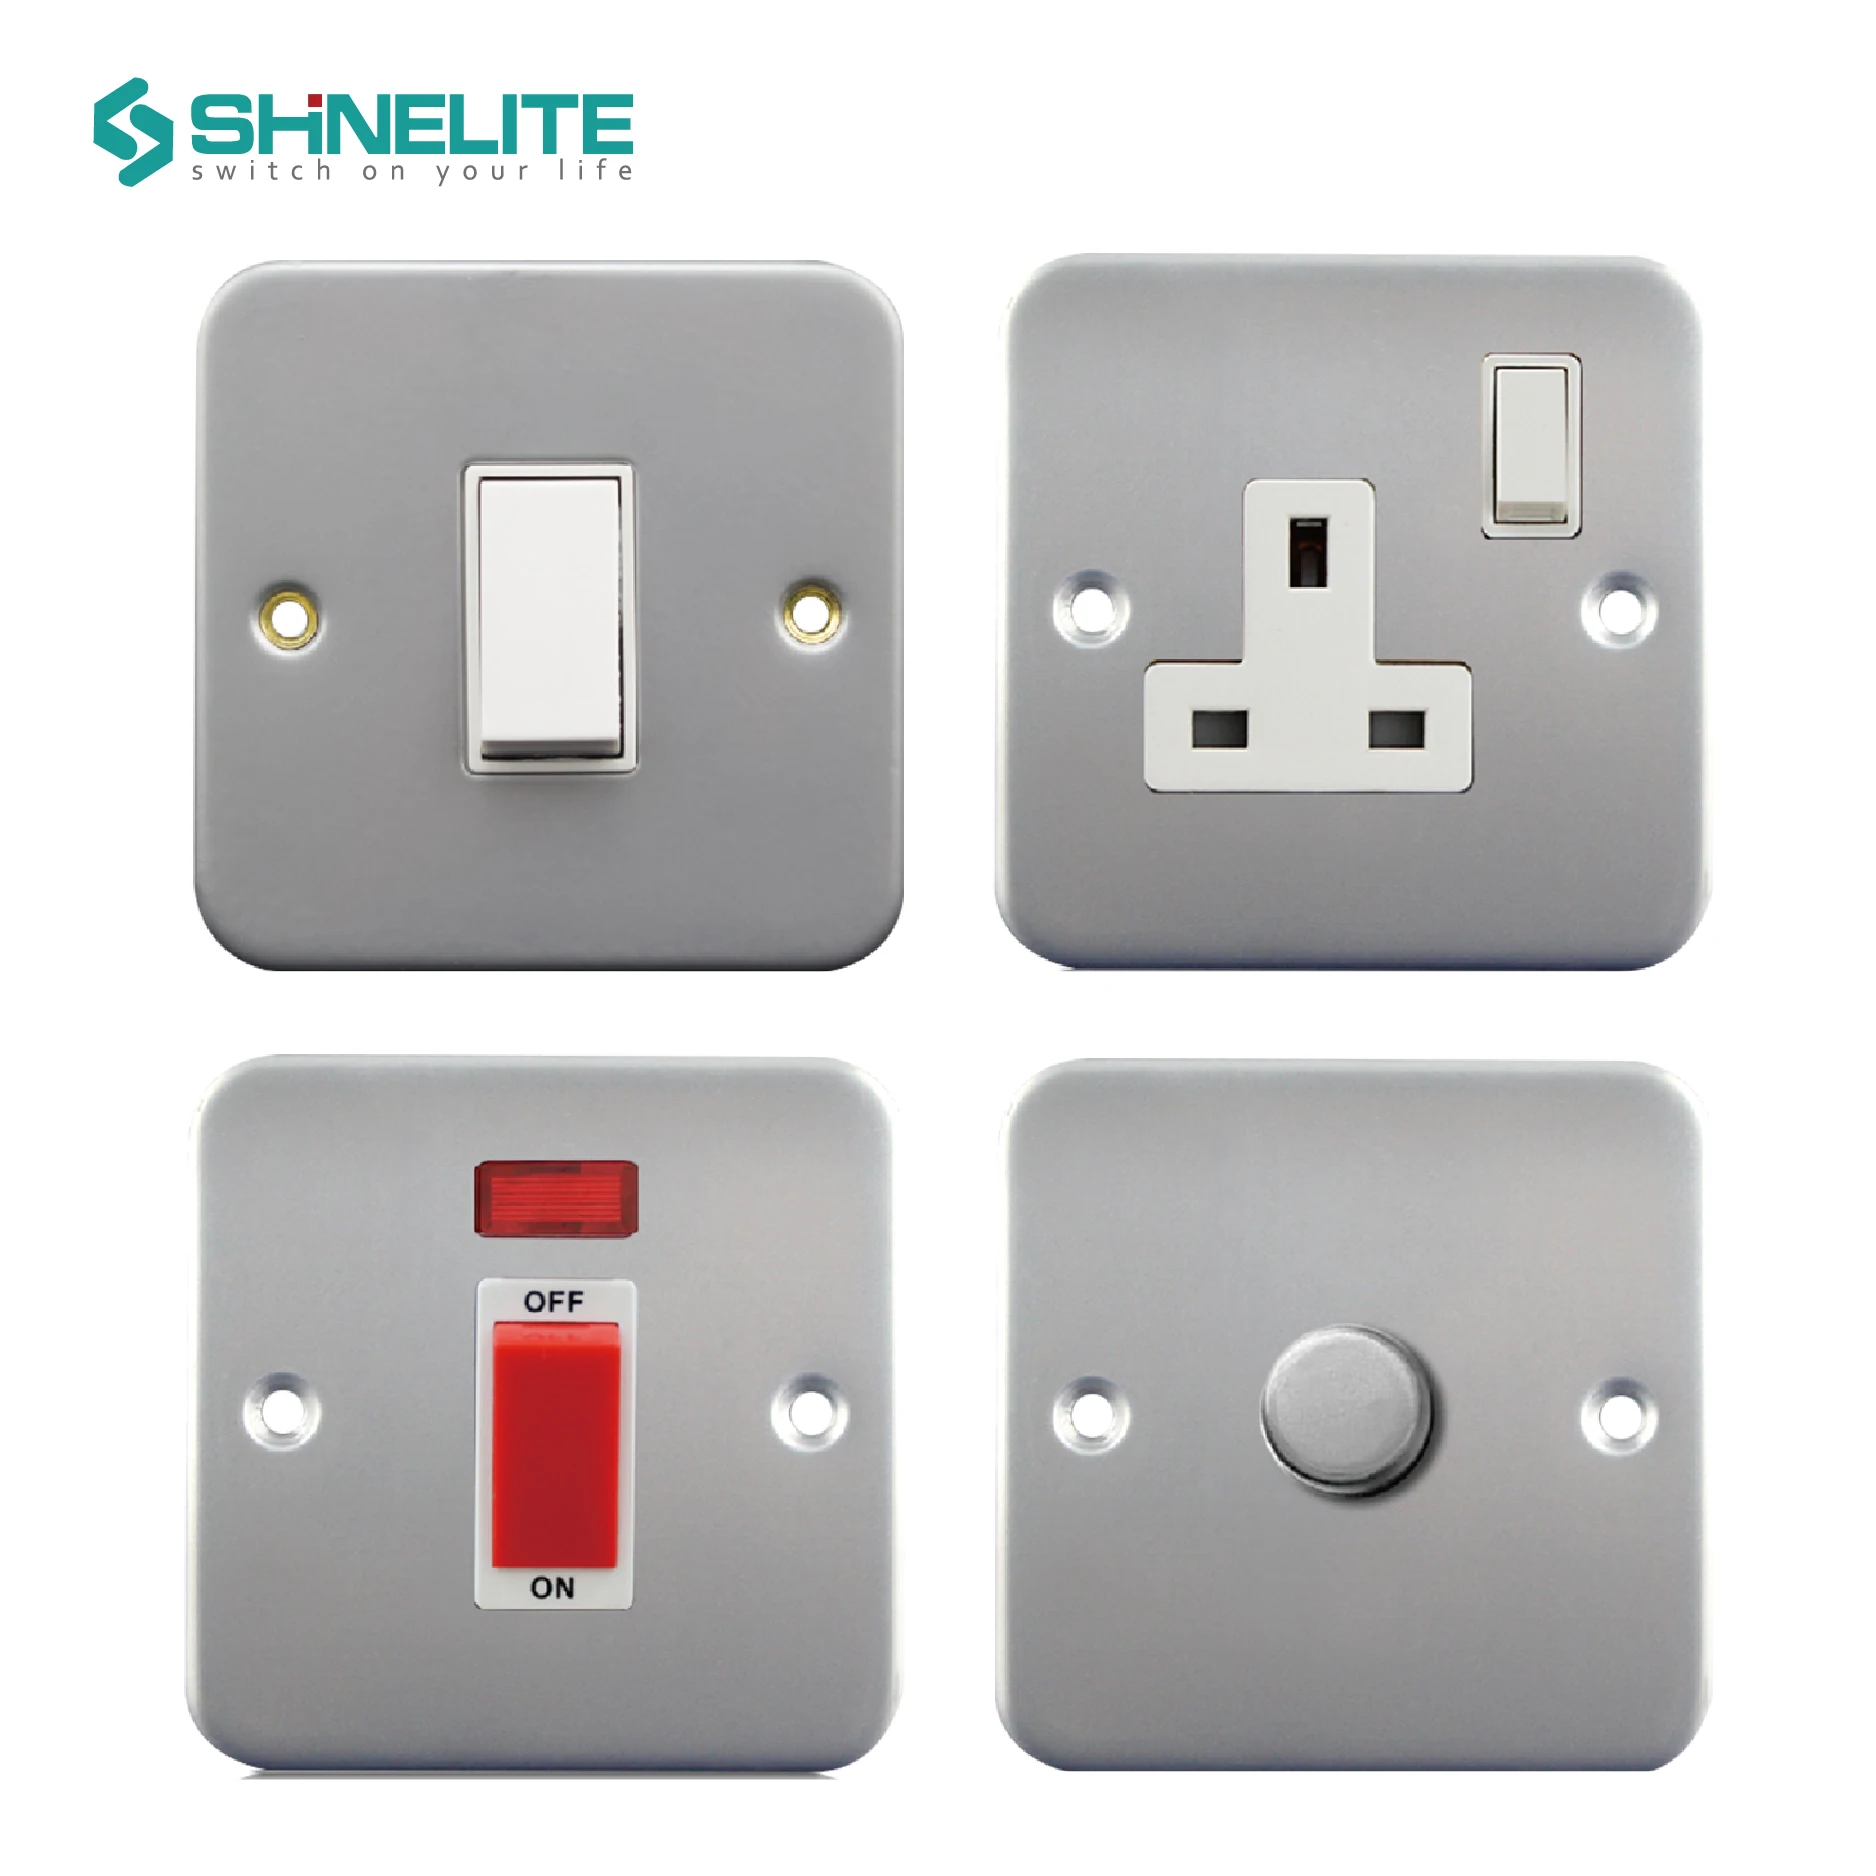 Modern electrical metal clad 1 gang dimmer wall light switch